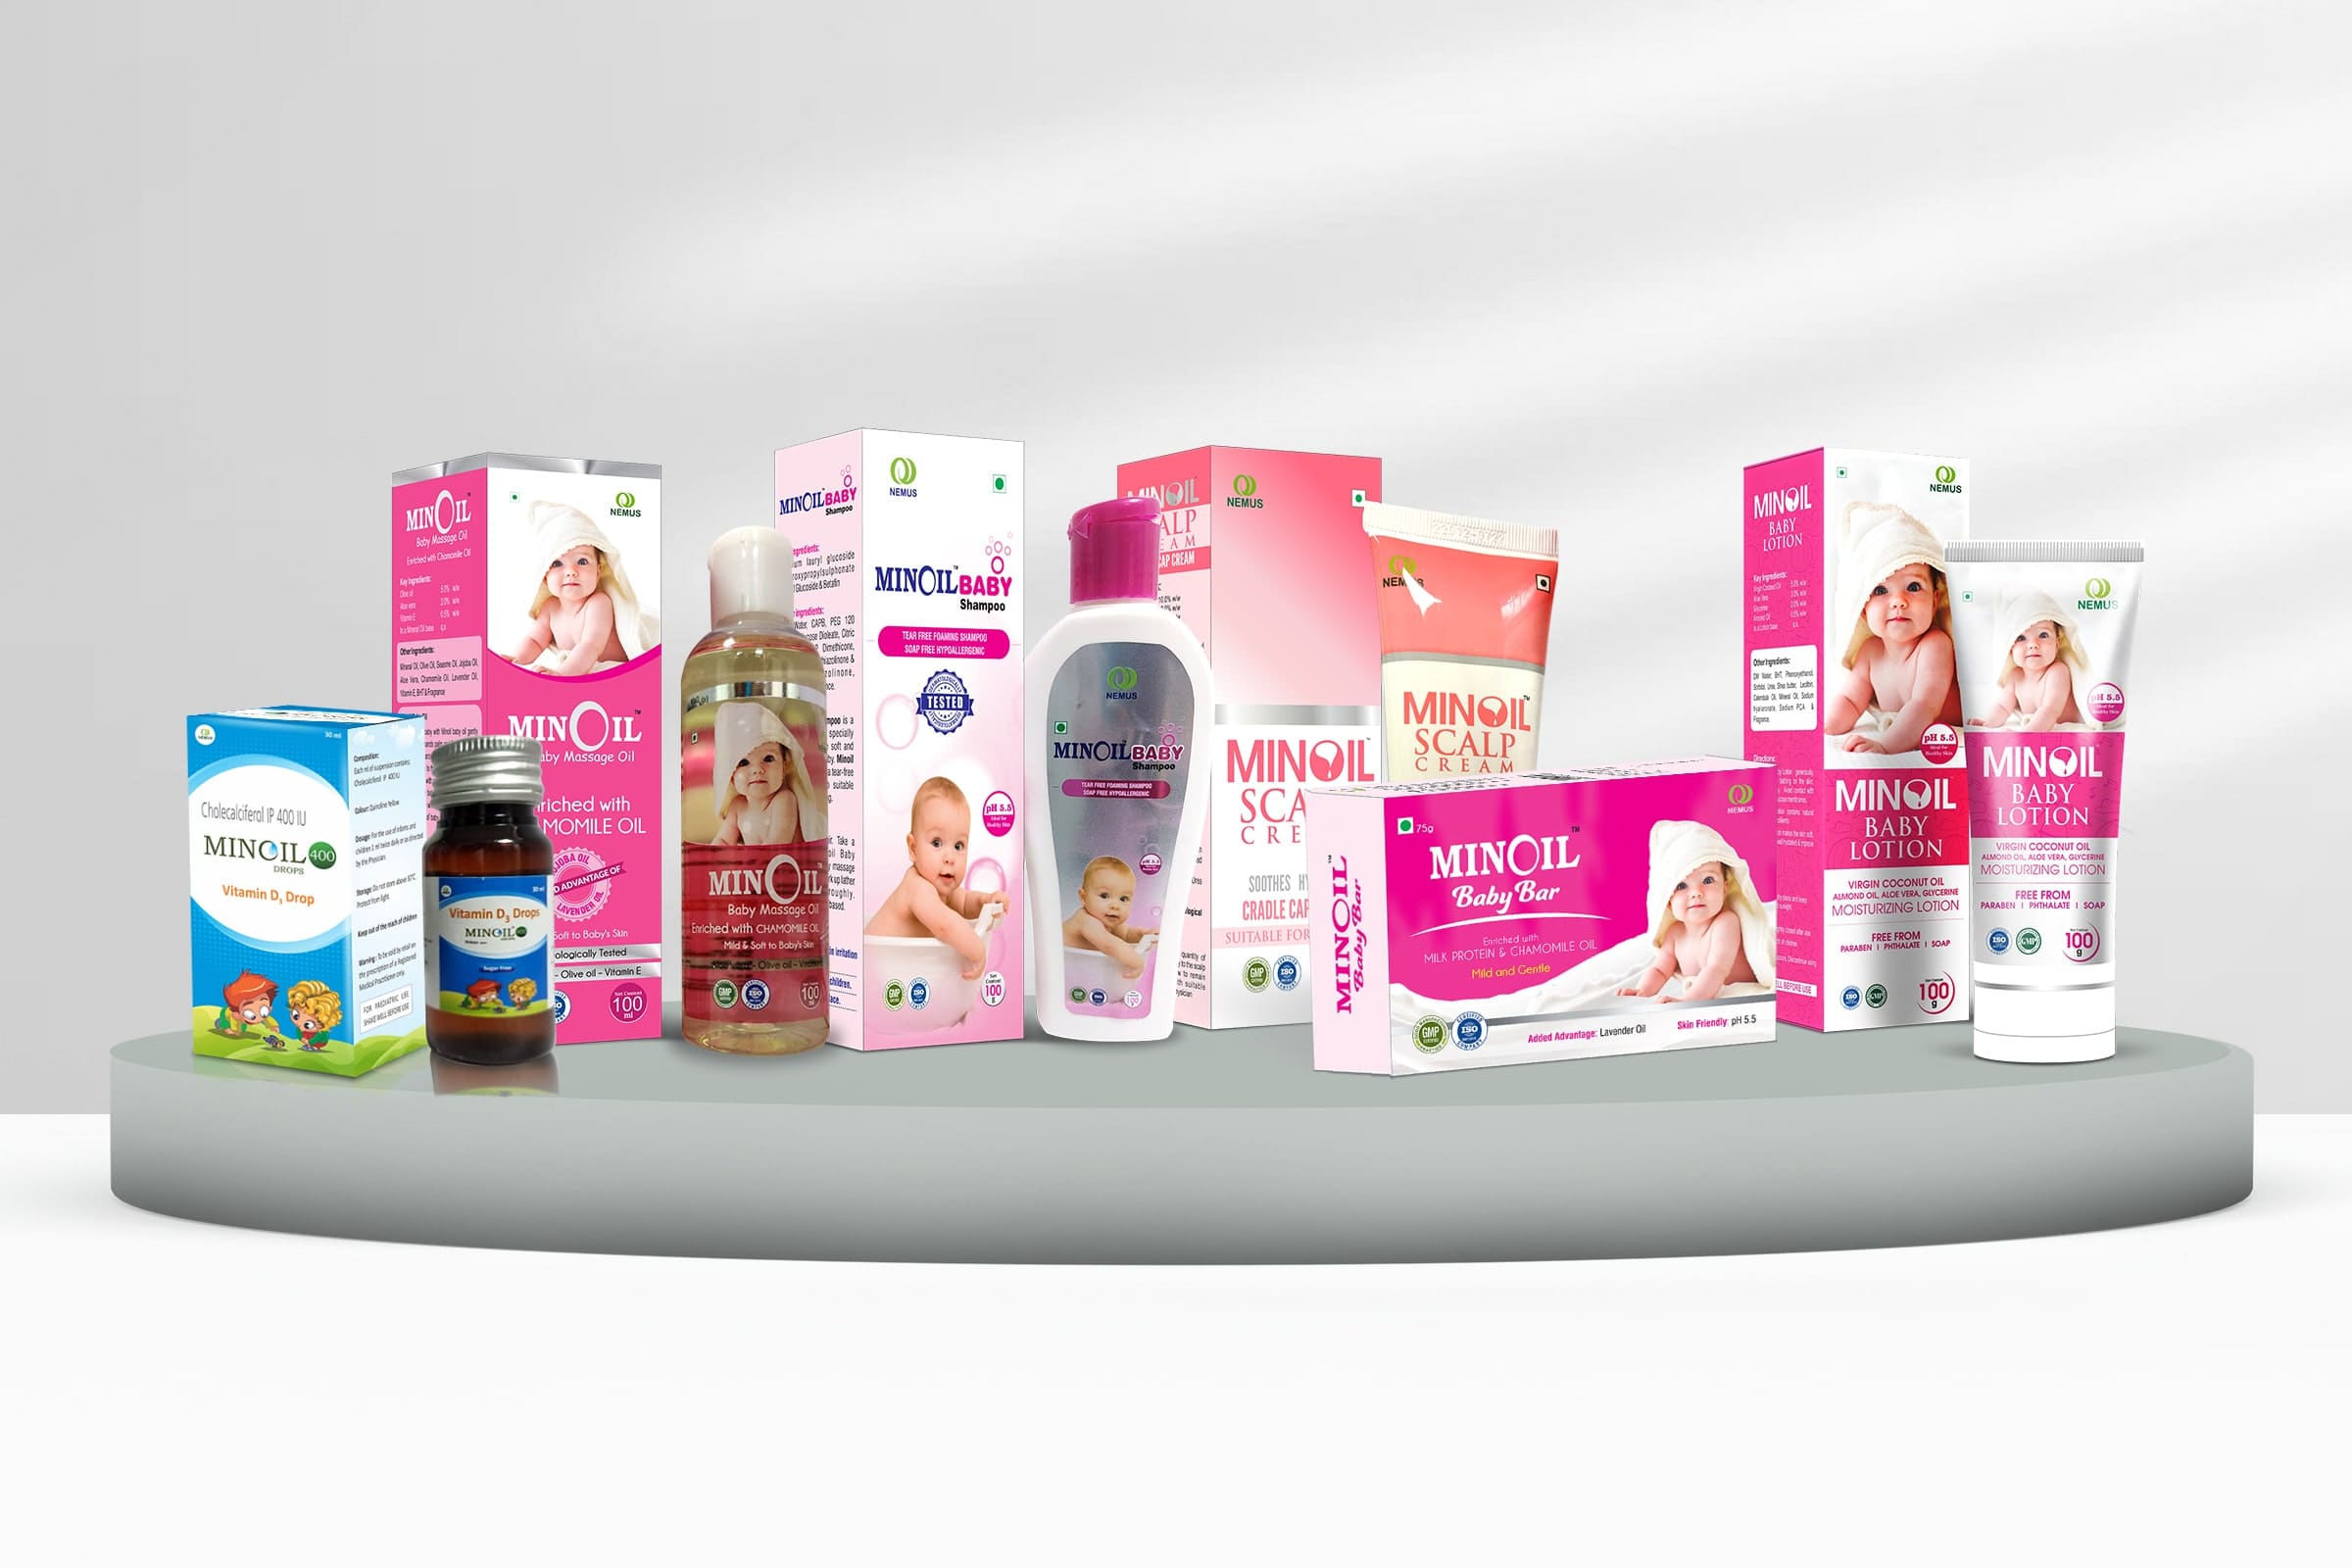 baby-products